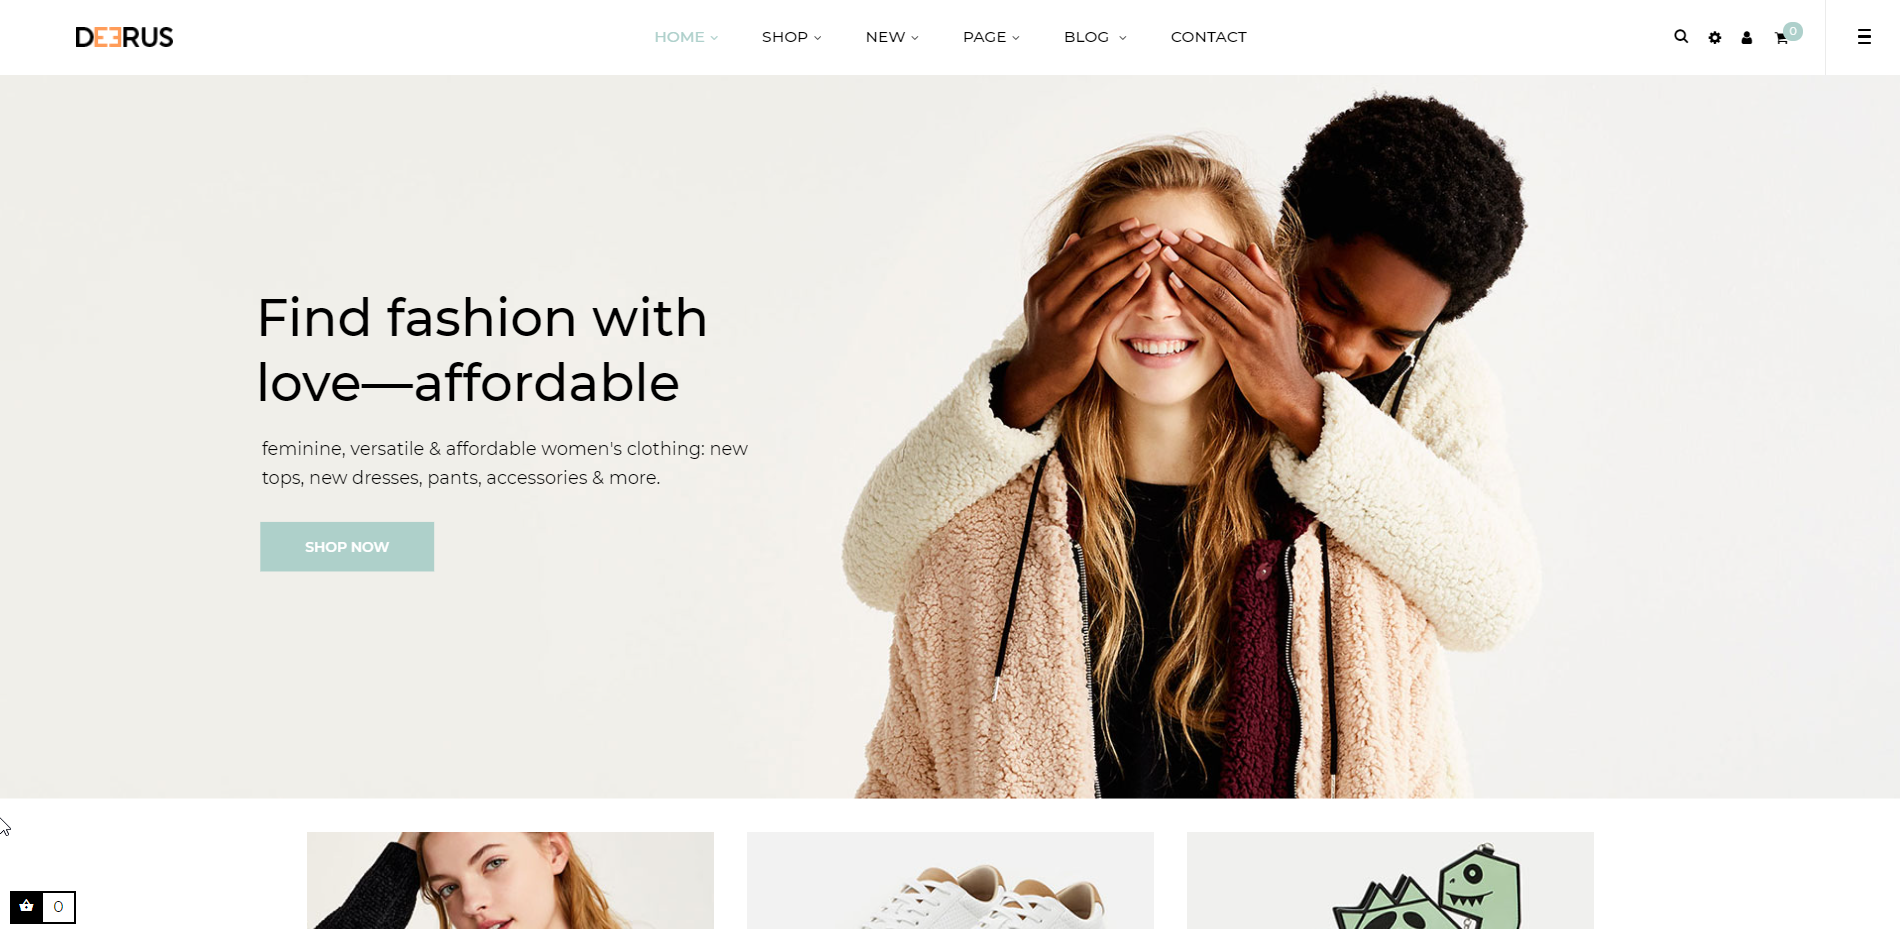 Bos Deerus Unisex Fashion and Accessories Theme